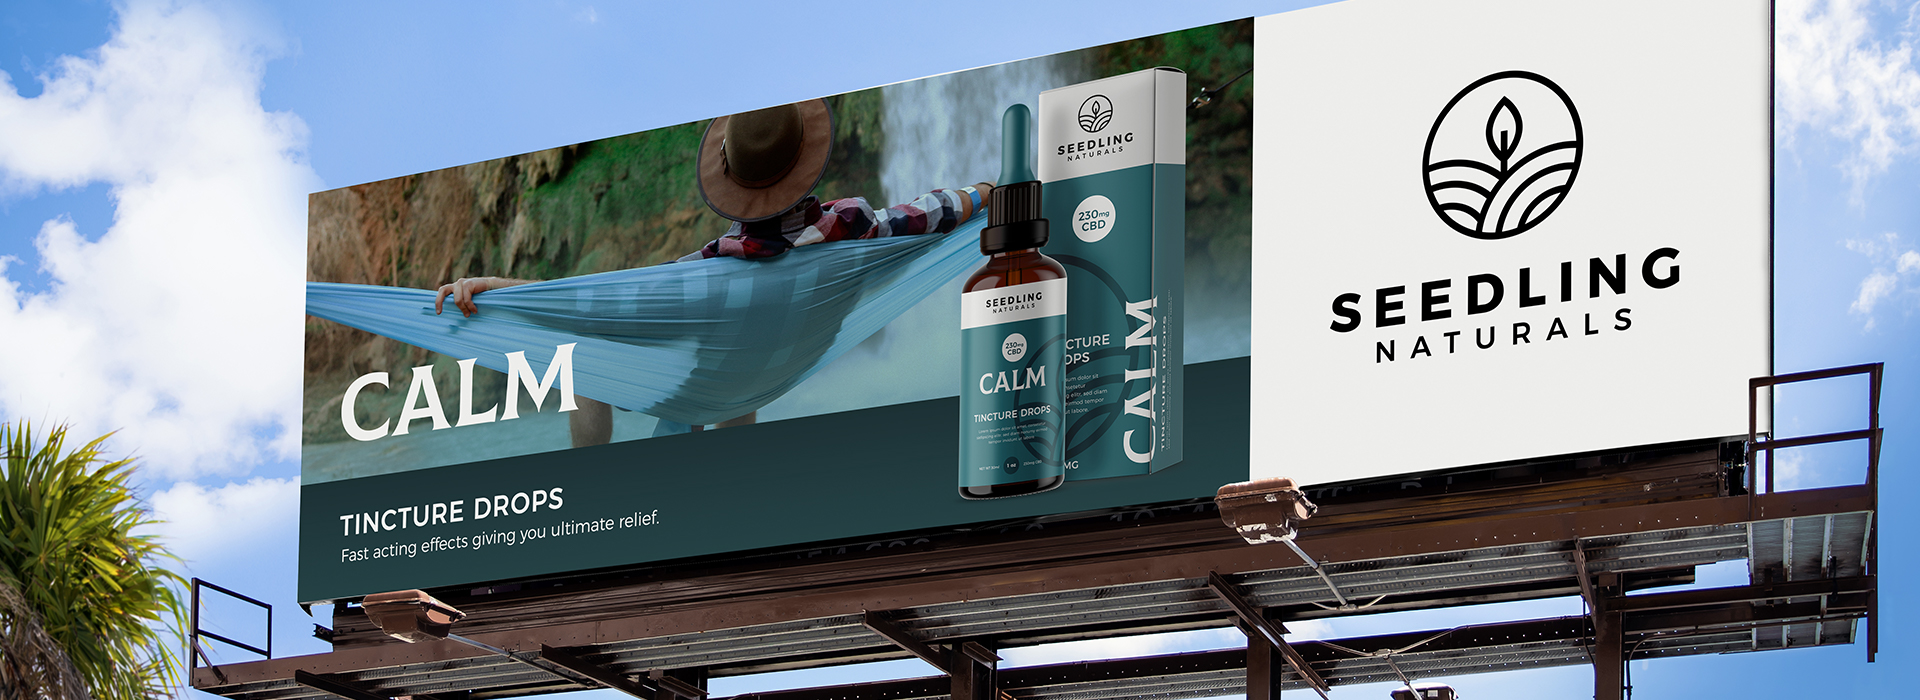 Outdoor advertising signage for cannabis beauty and personal care products